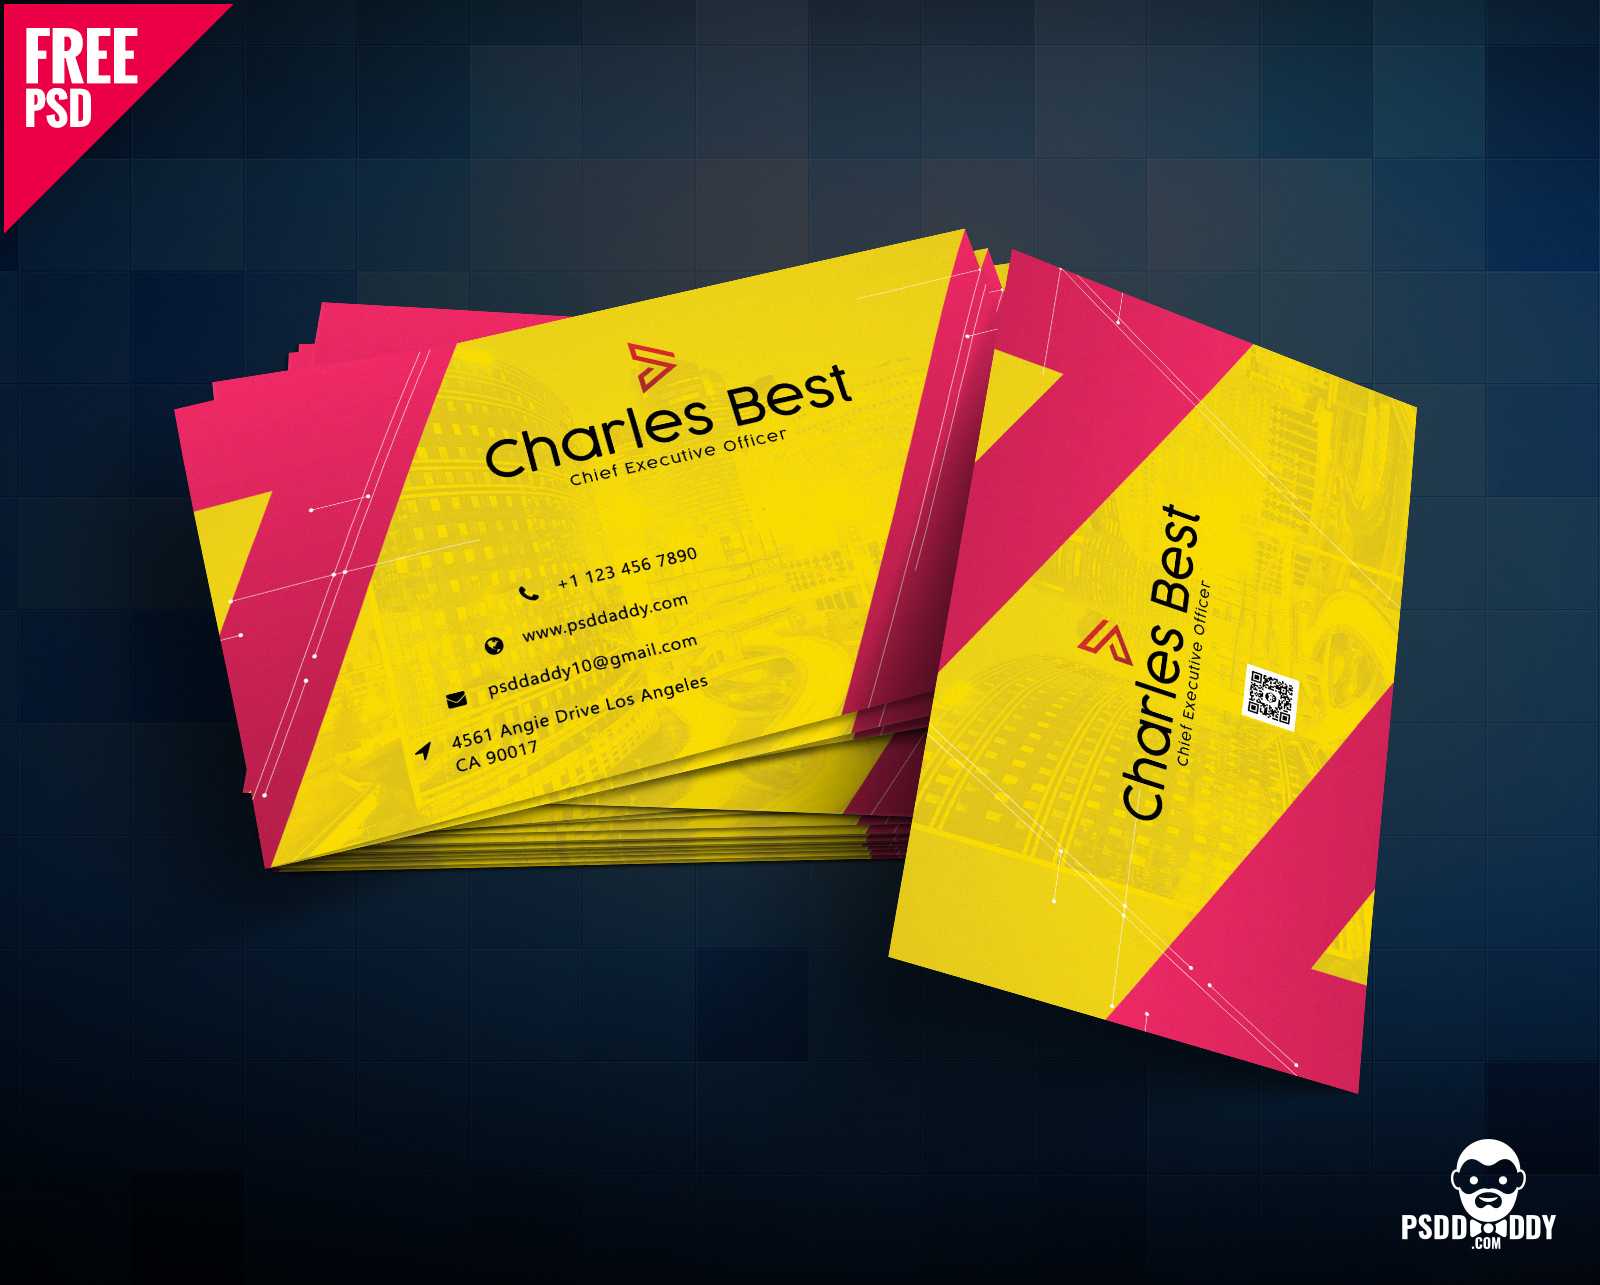 Download] Creative Business Card Free Psd | Psddaddy Within Name Card Photoshop Template